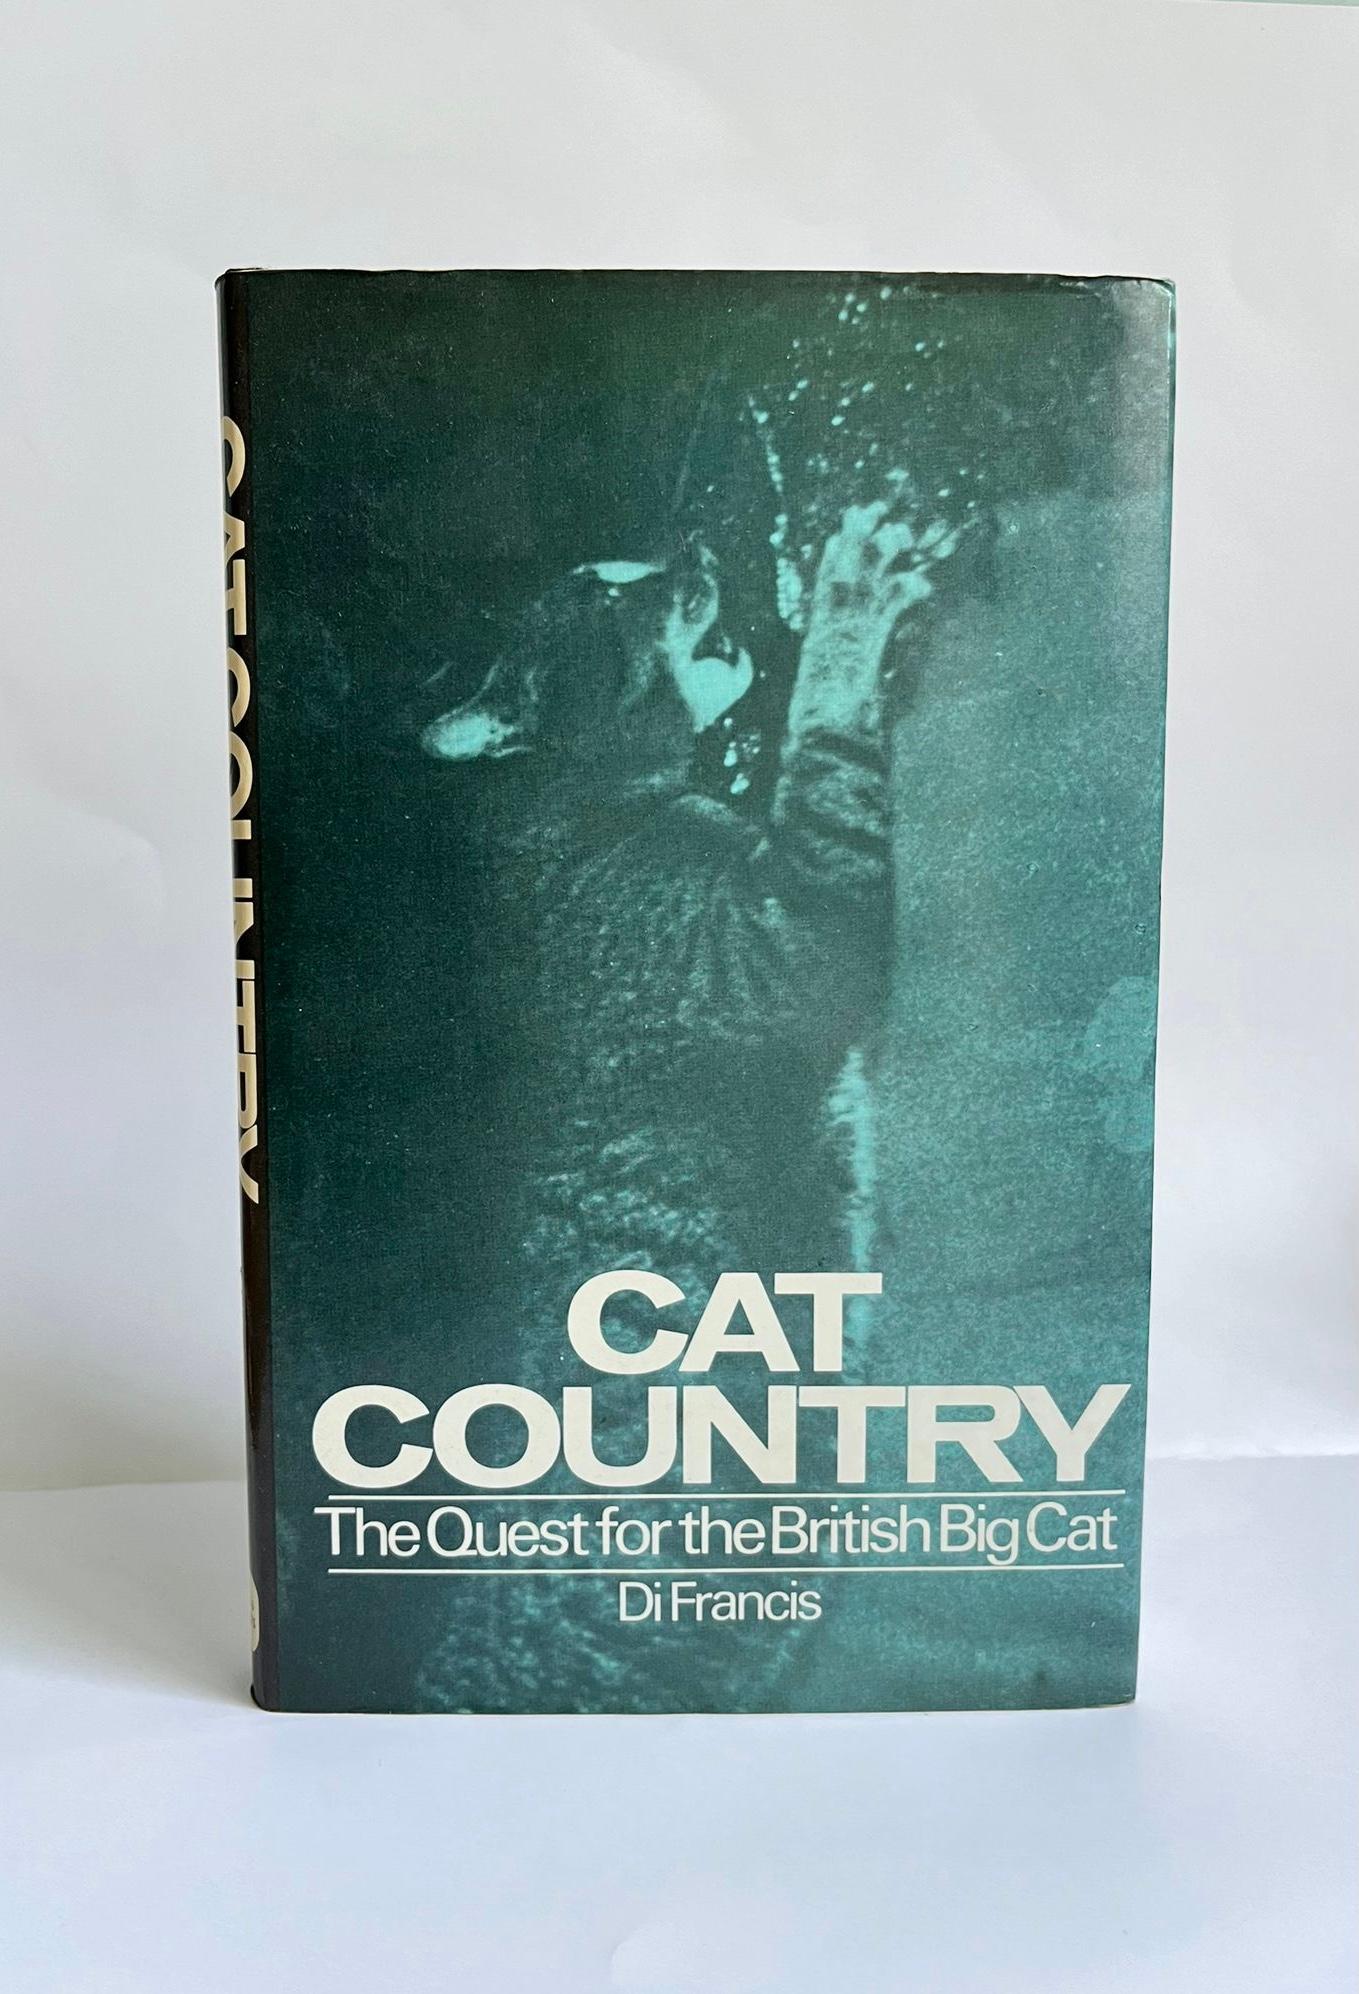 Cat Country: The Quest for the British Big Cat by Di Francis